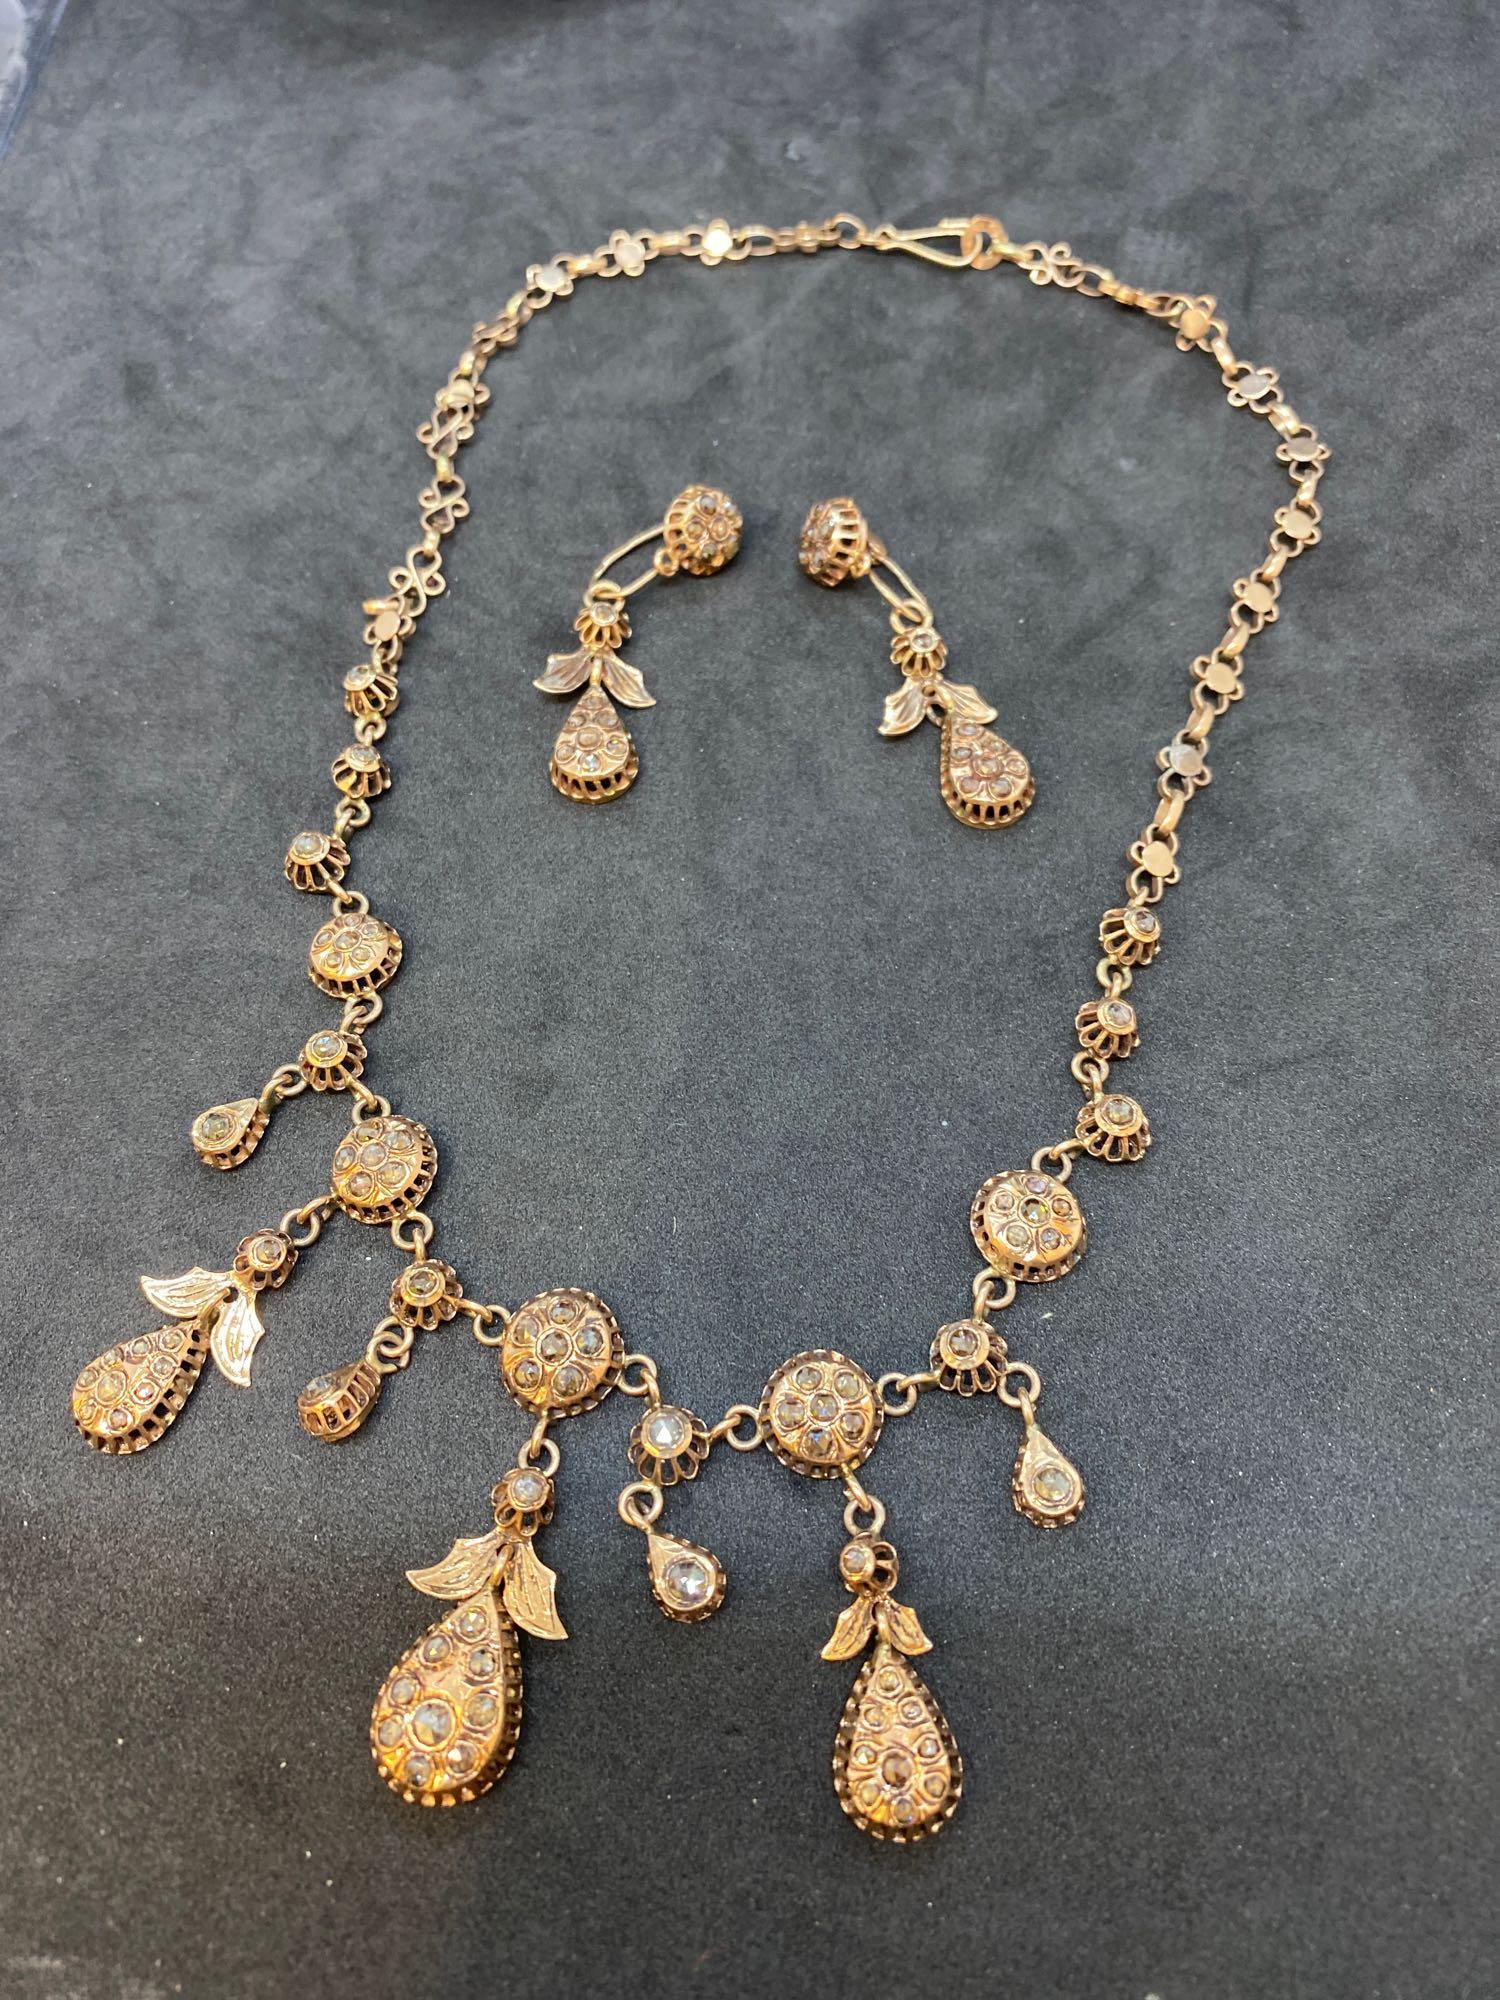 Vintage 6.00ct Approx Rose Cut Diamond Set Necklace and Matching Earrings 9ct Gold - 41 Grams - Image 5 of 5